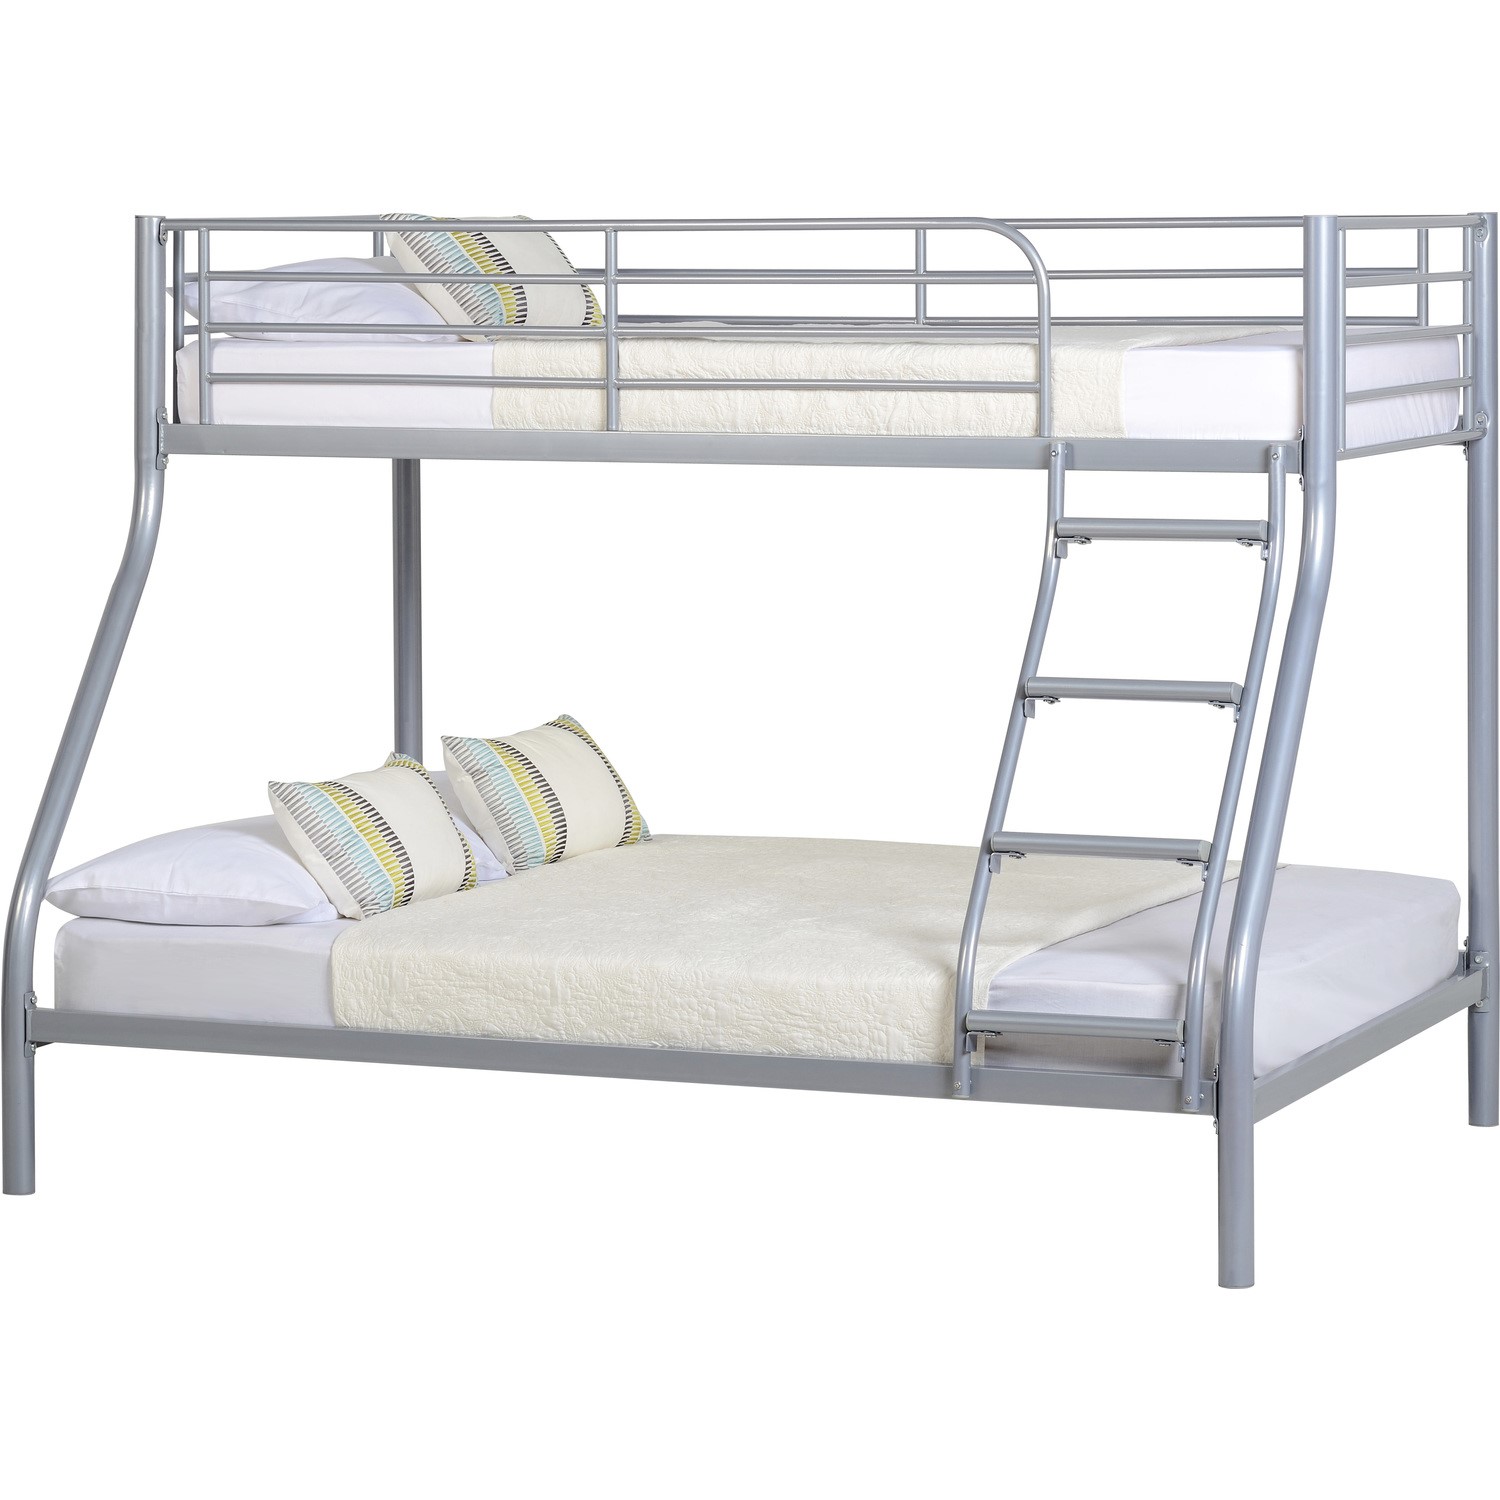 Photo of Silver metal triple sleeper bunk bed - tandi - seconique